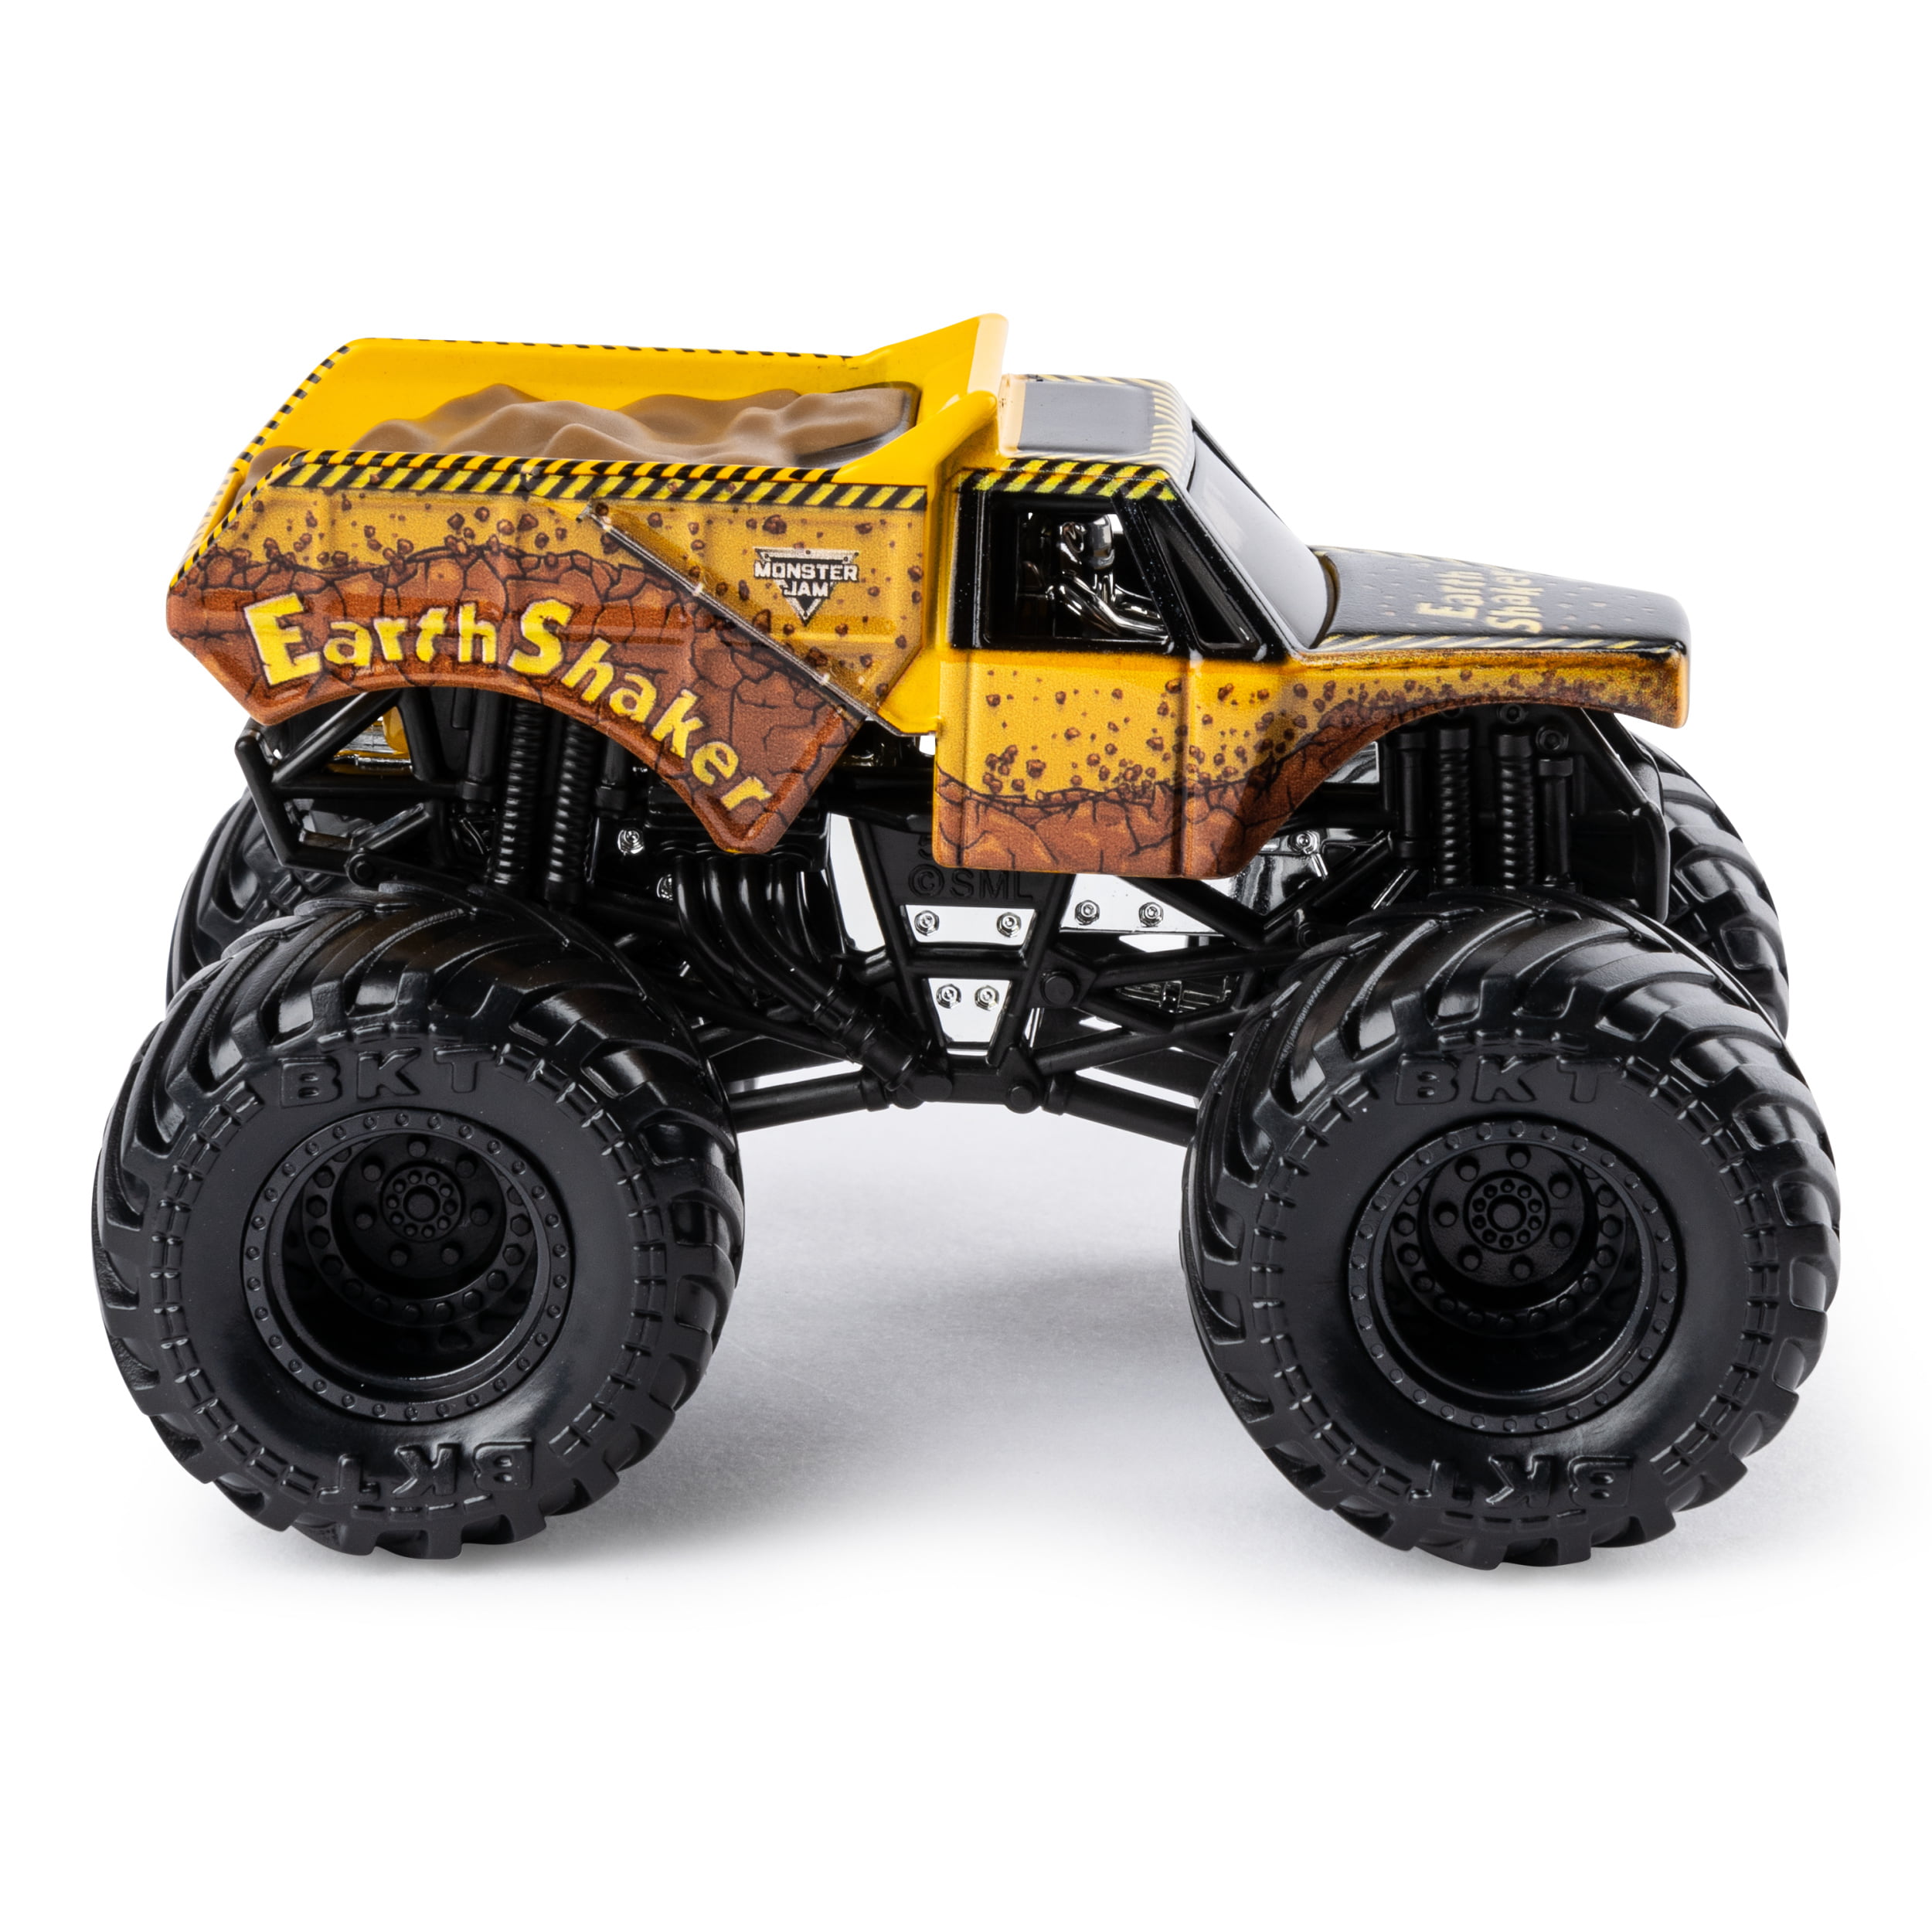 Earthshaker Monster  Truck  Remote  Control The Earth 